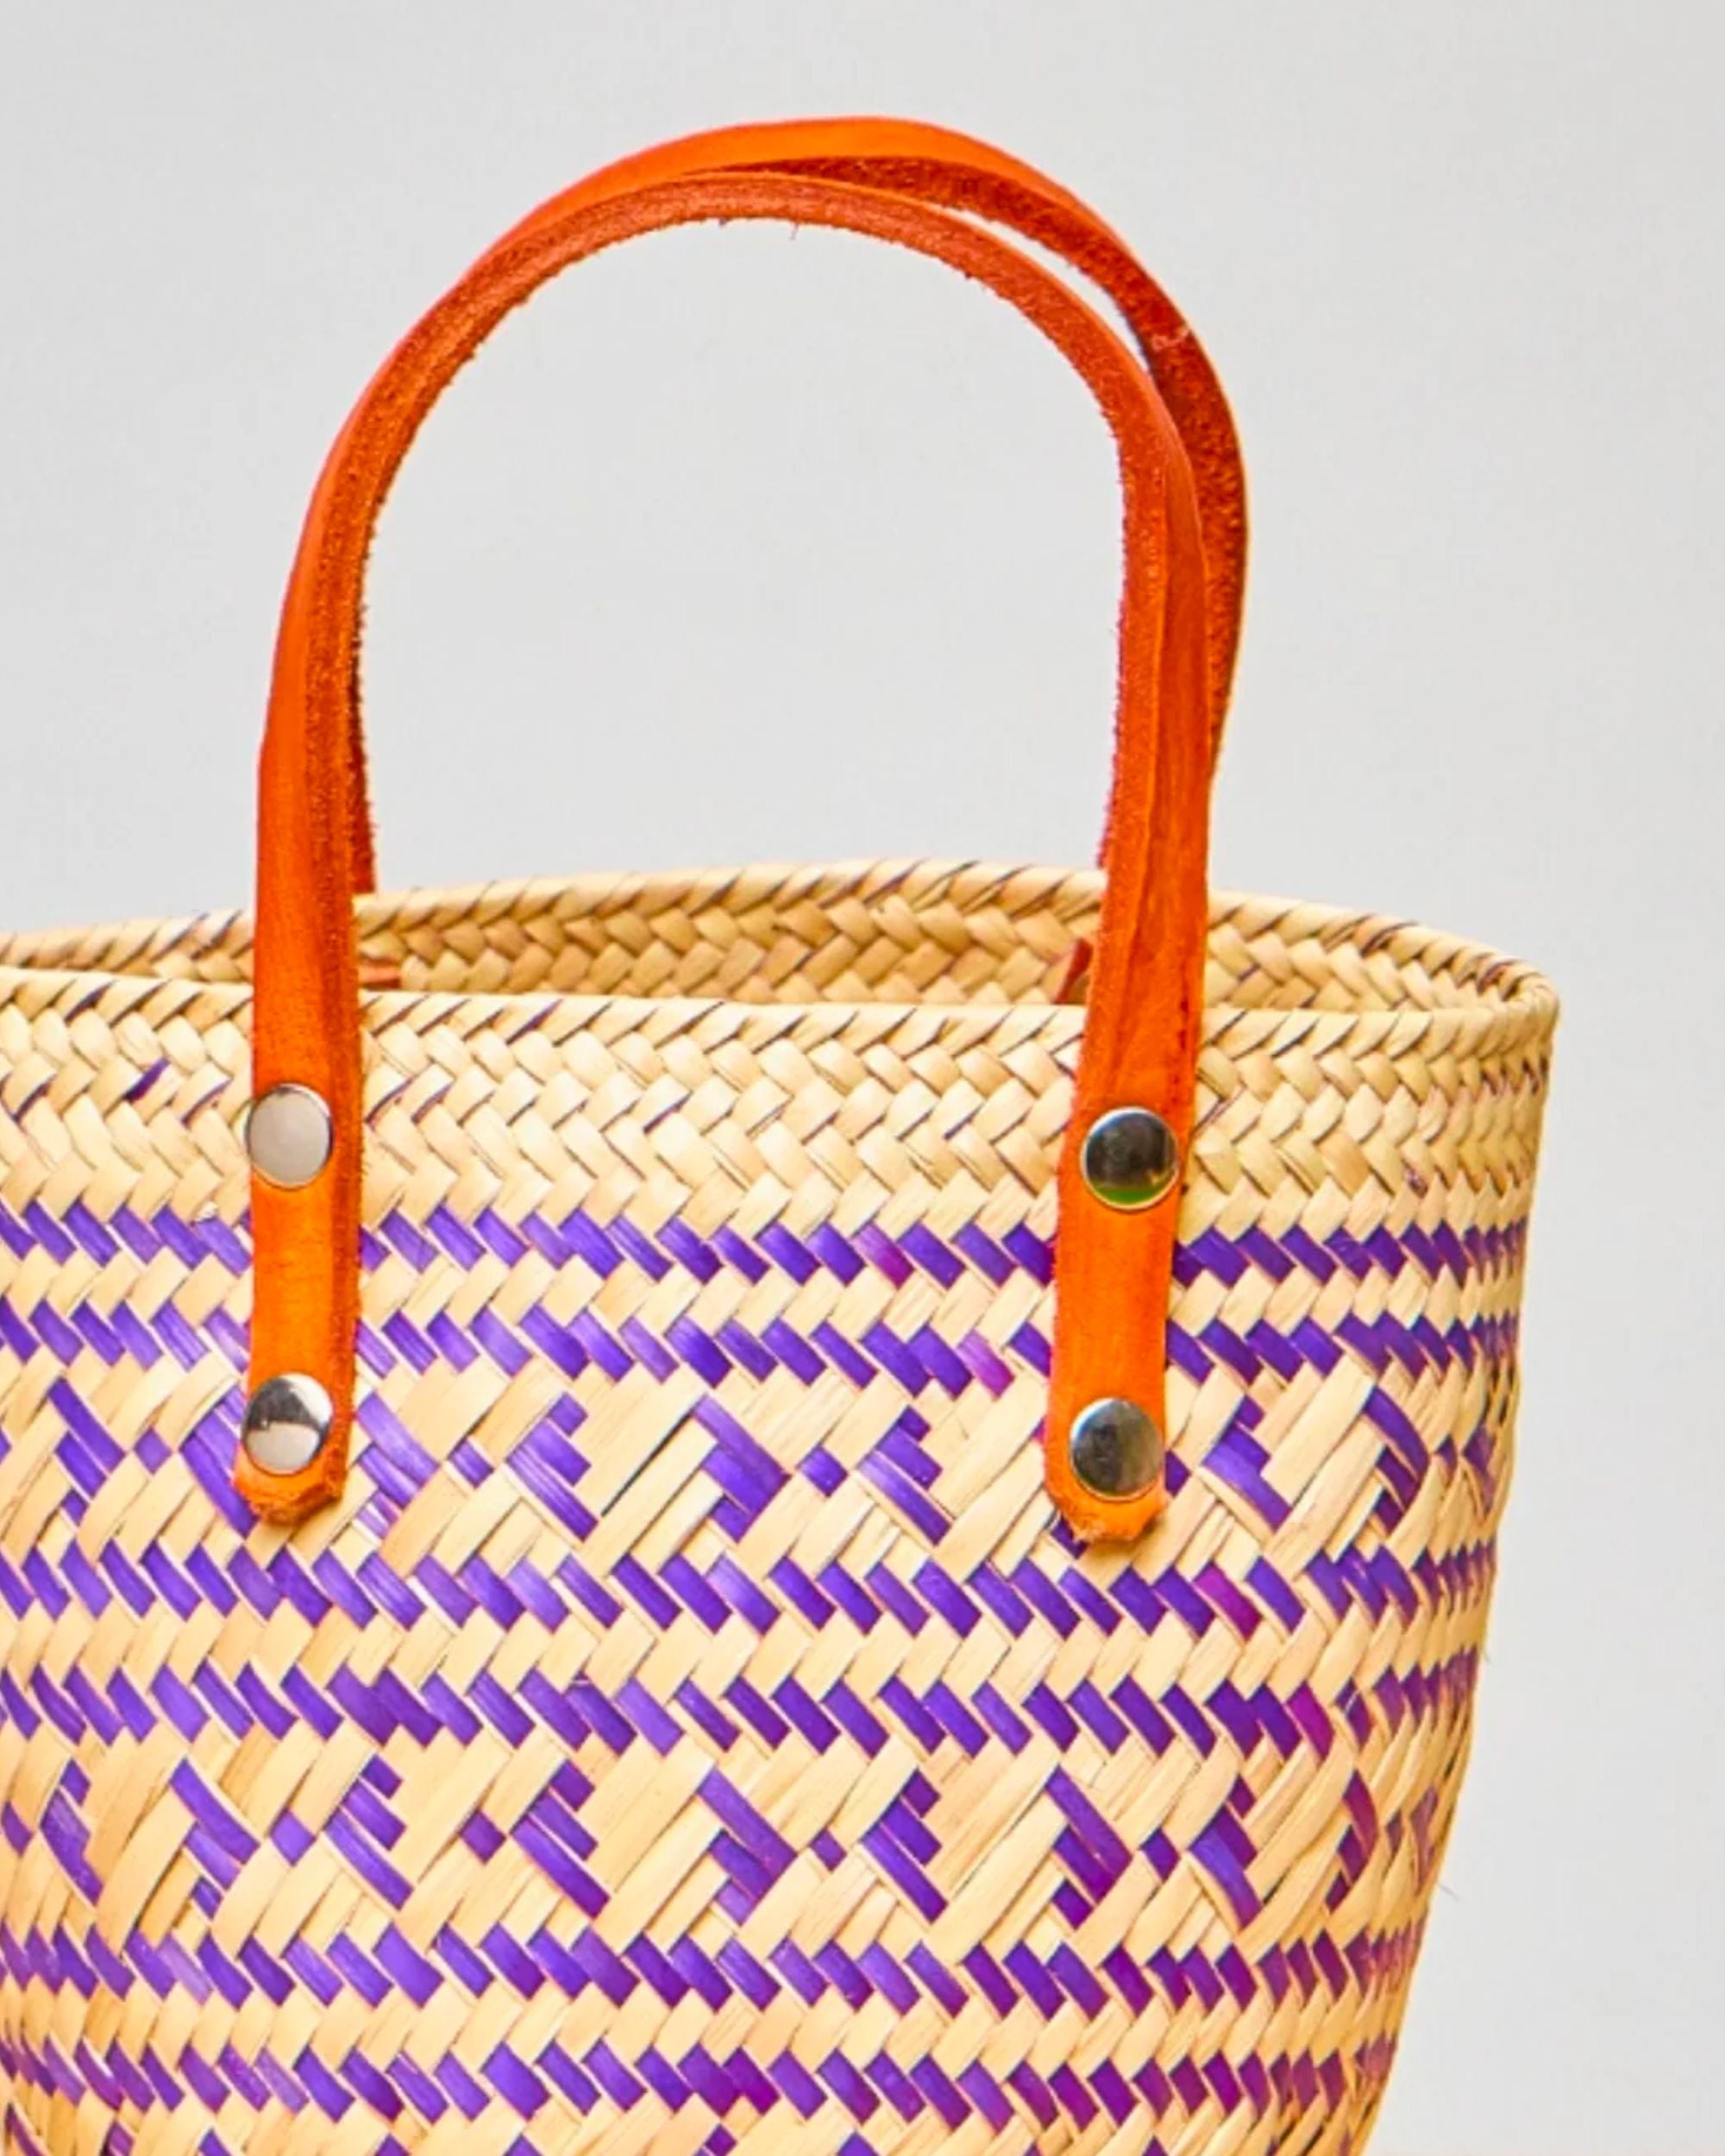 THE PALM TOTE